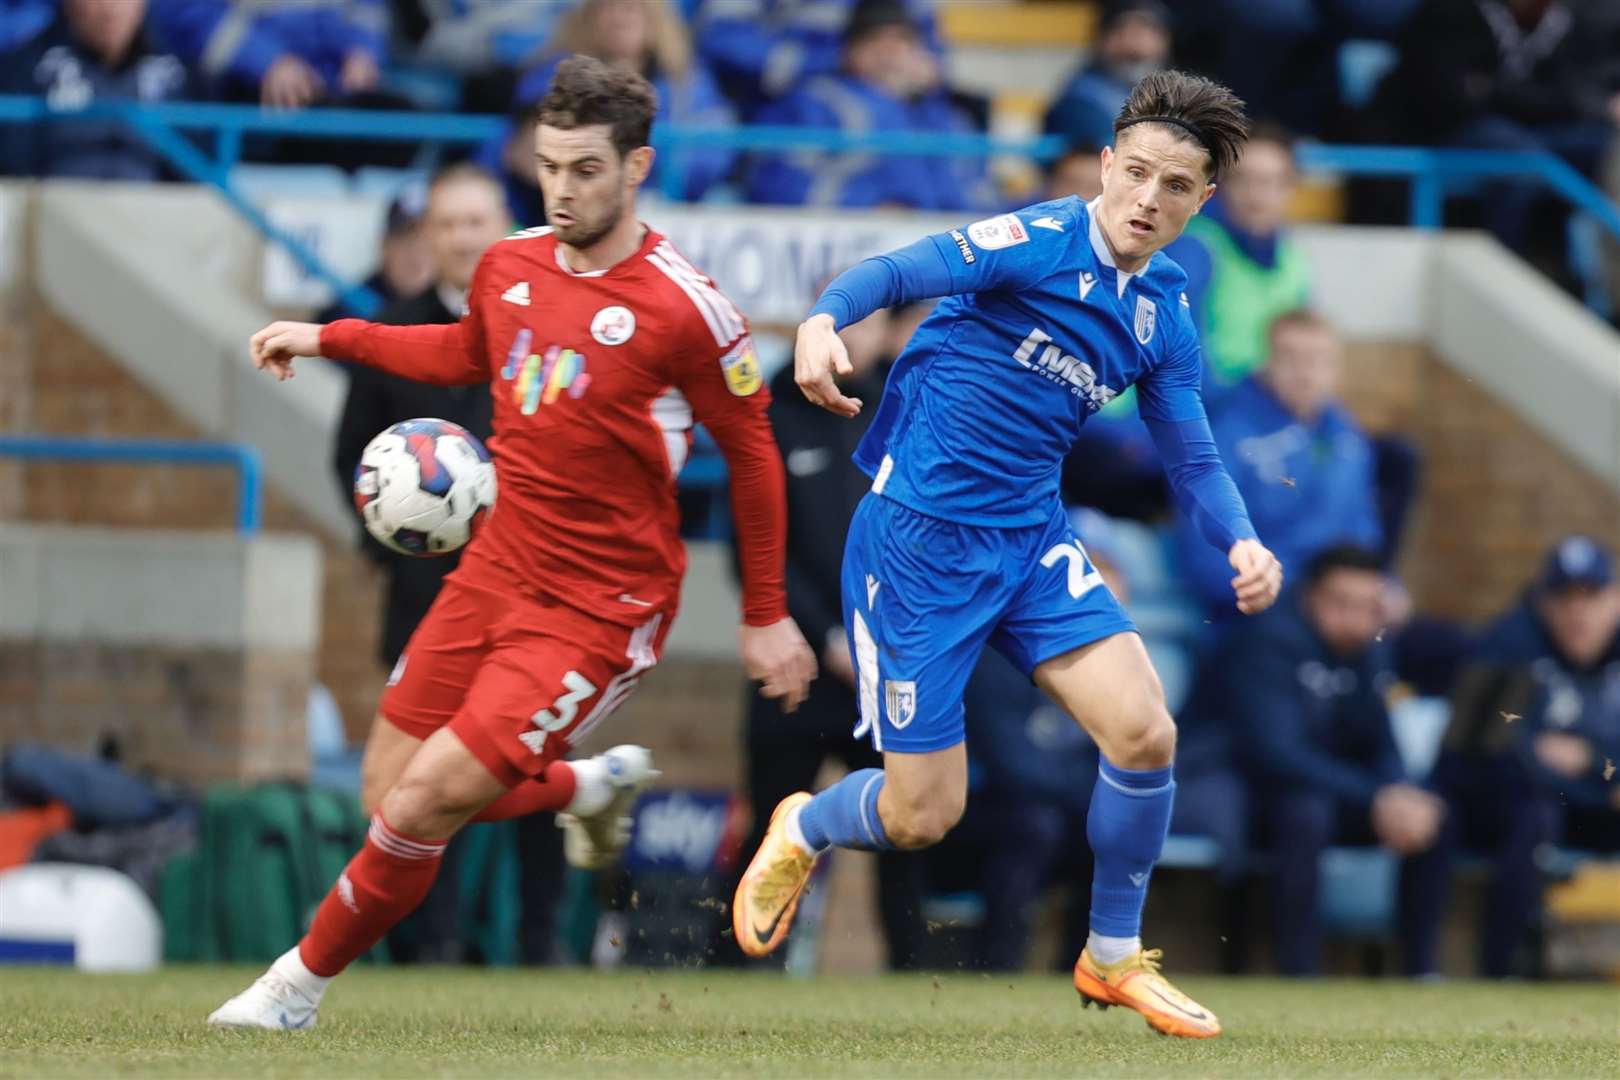 Tom Nichols in action for Gillingham against his old team Crawley Town at Priestfield last weekend